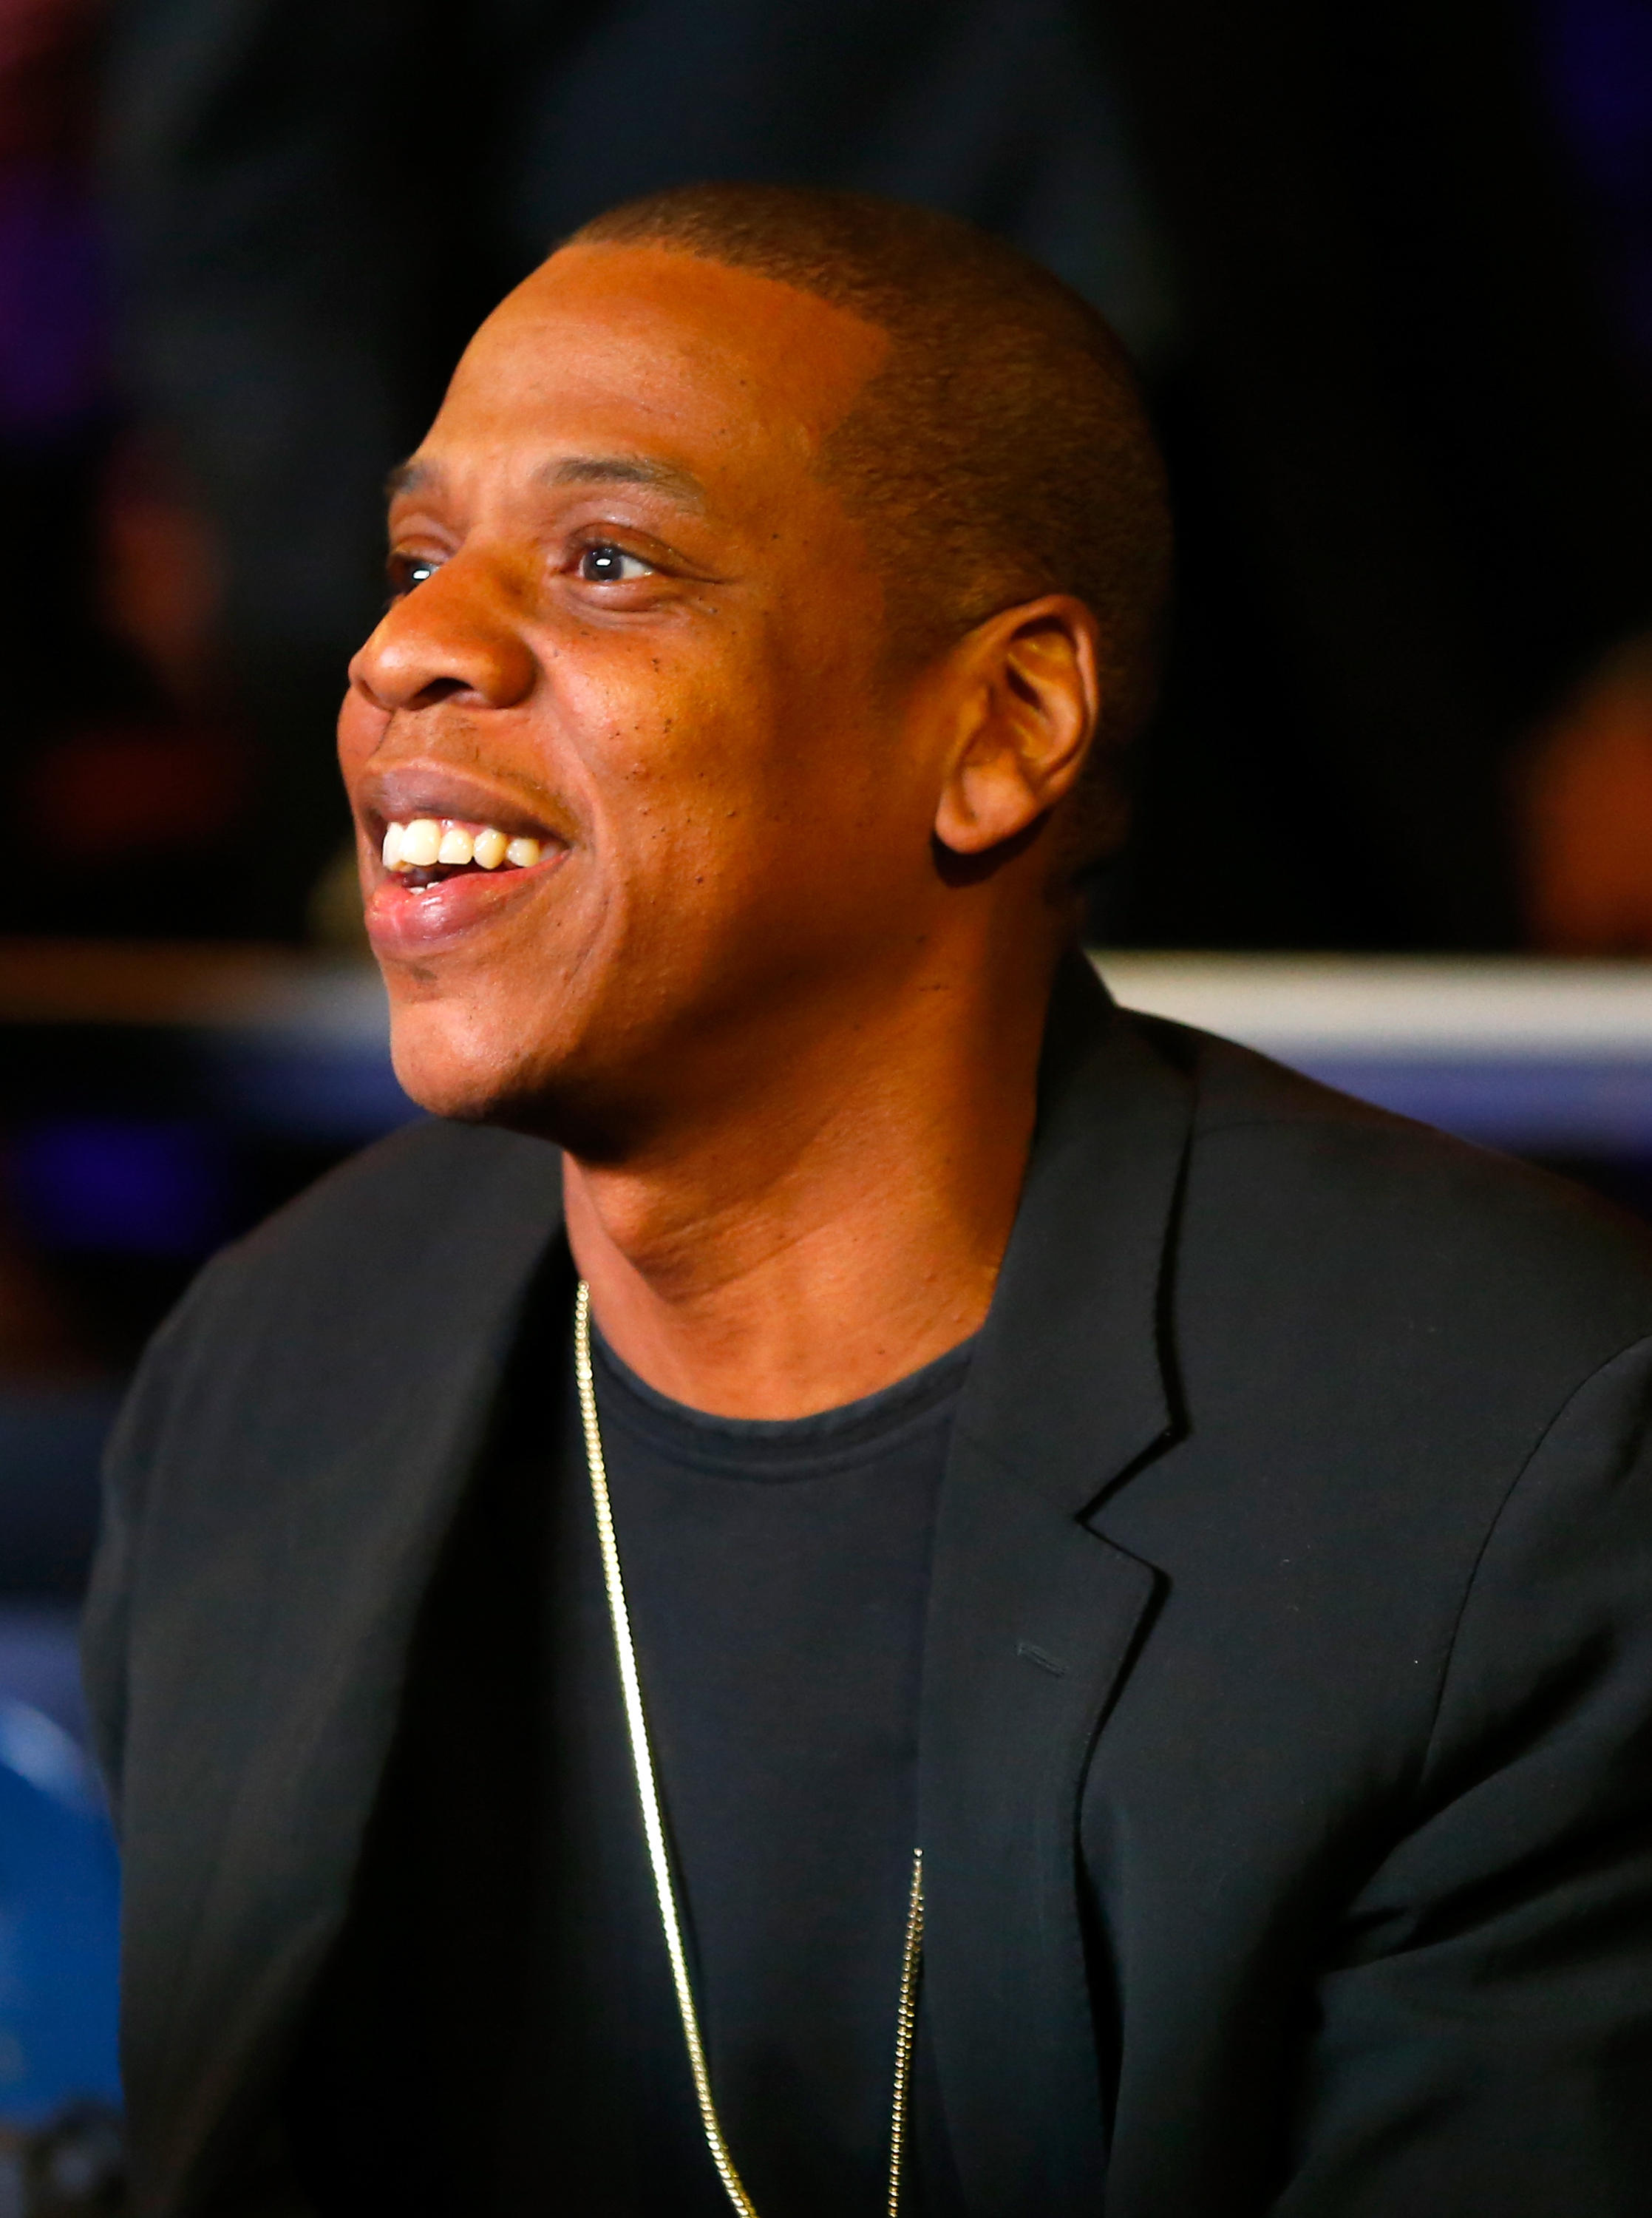 jay z at madison square garden in new york city.